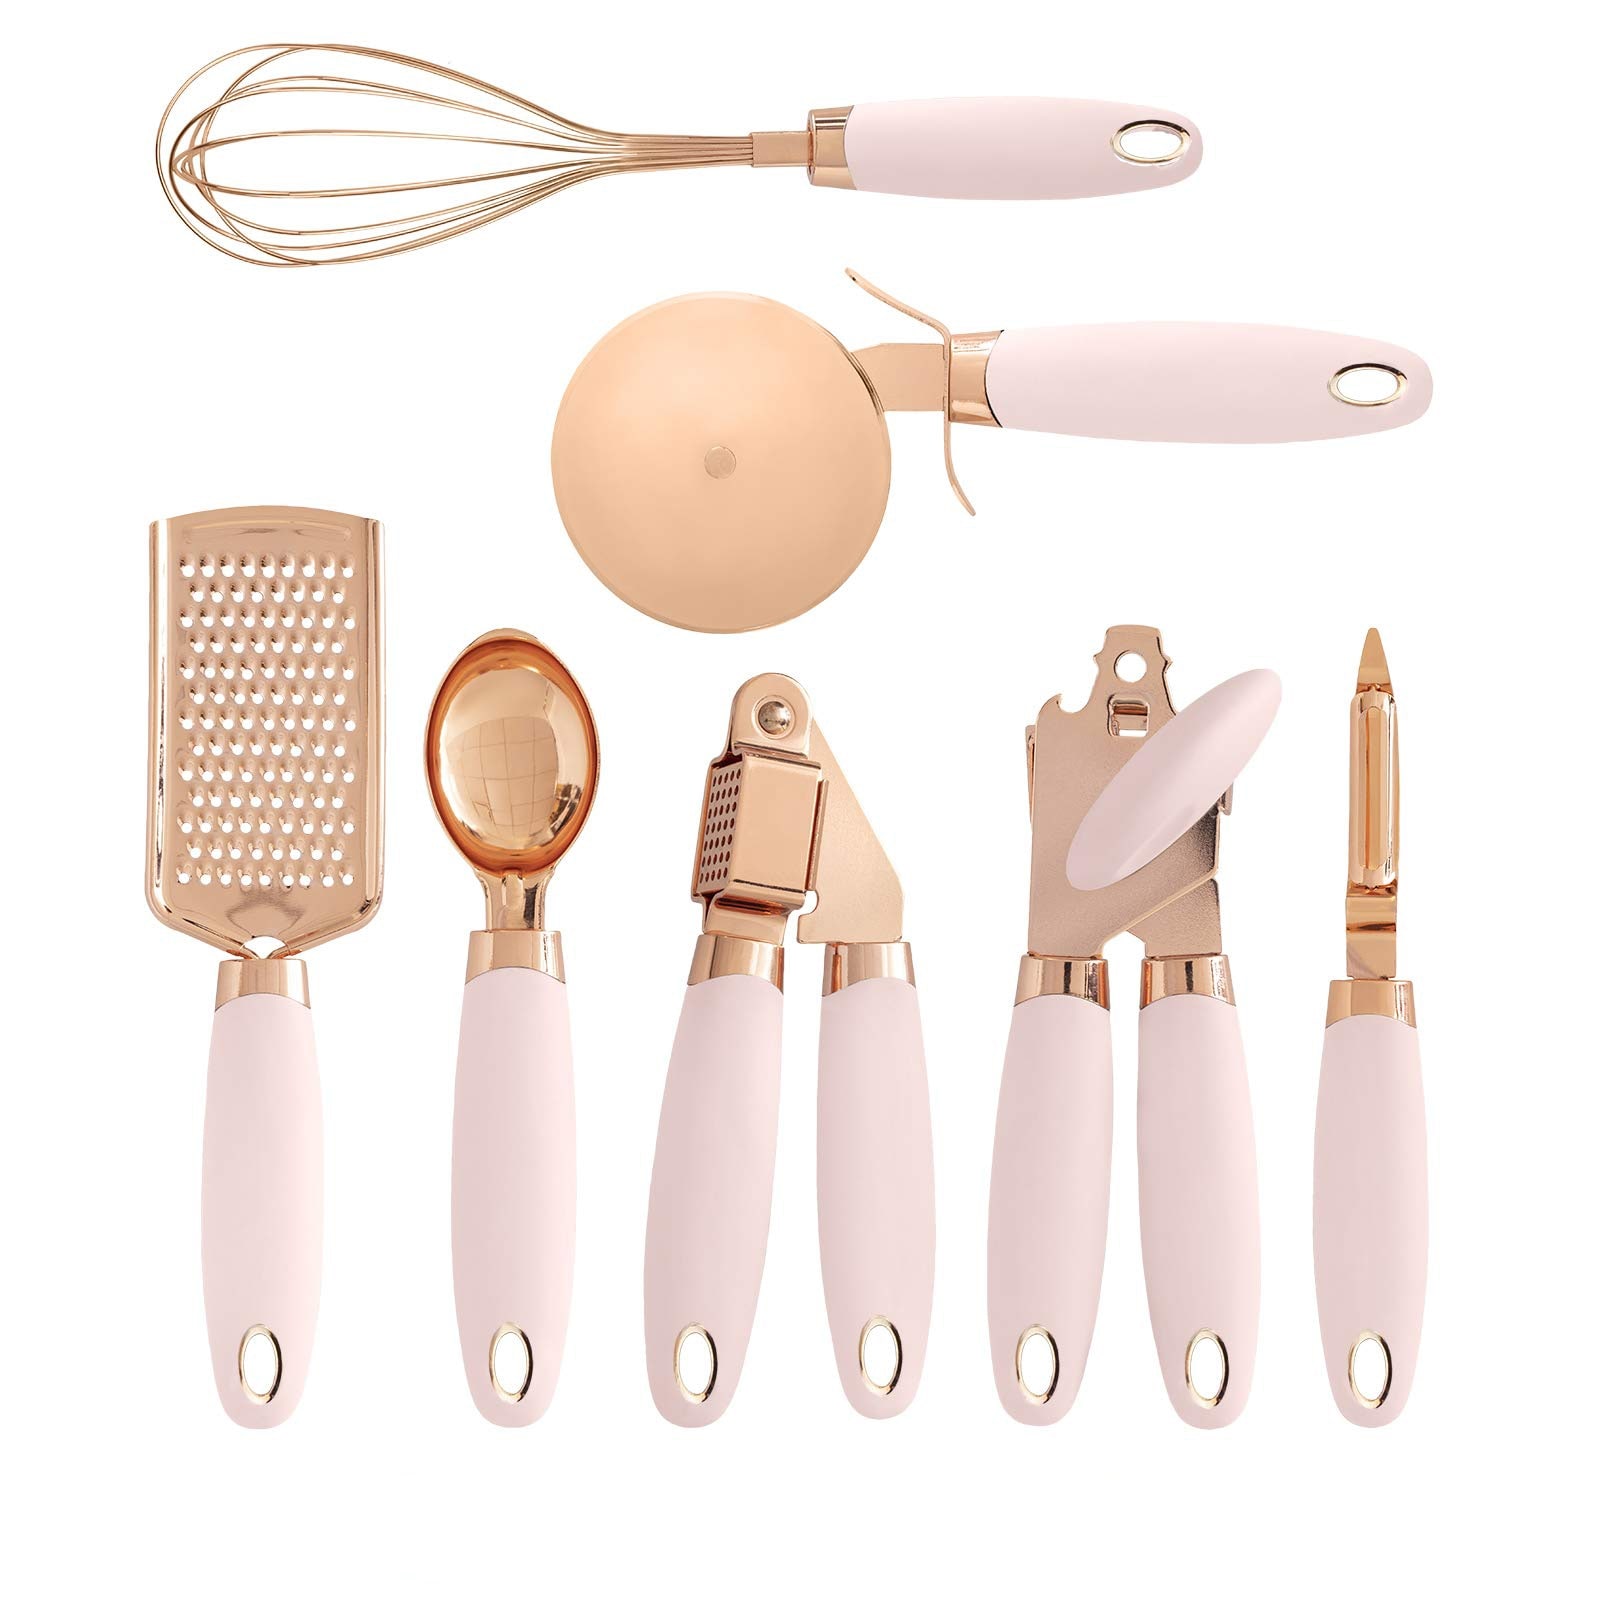 https://ak1.ostkcdn.com/images/products/is/images/direct/d648dbe2ba35f44f482617dd653d7de664570b63/7-Pc-Kitchen-Gadget-Set-Copper-Coated-Stainless-Steel-Utensils.jpg